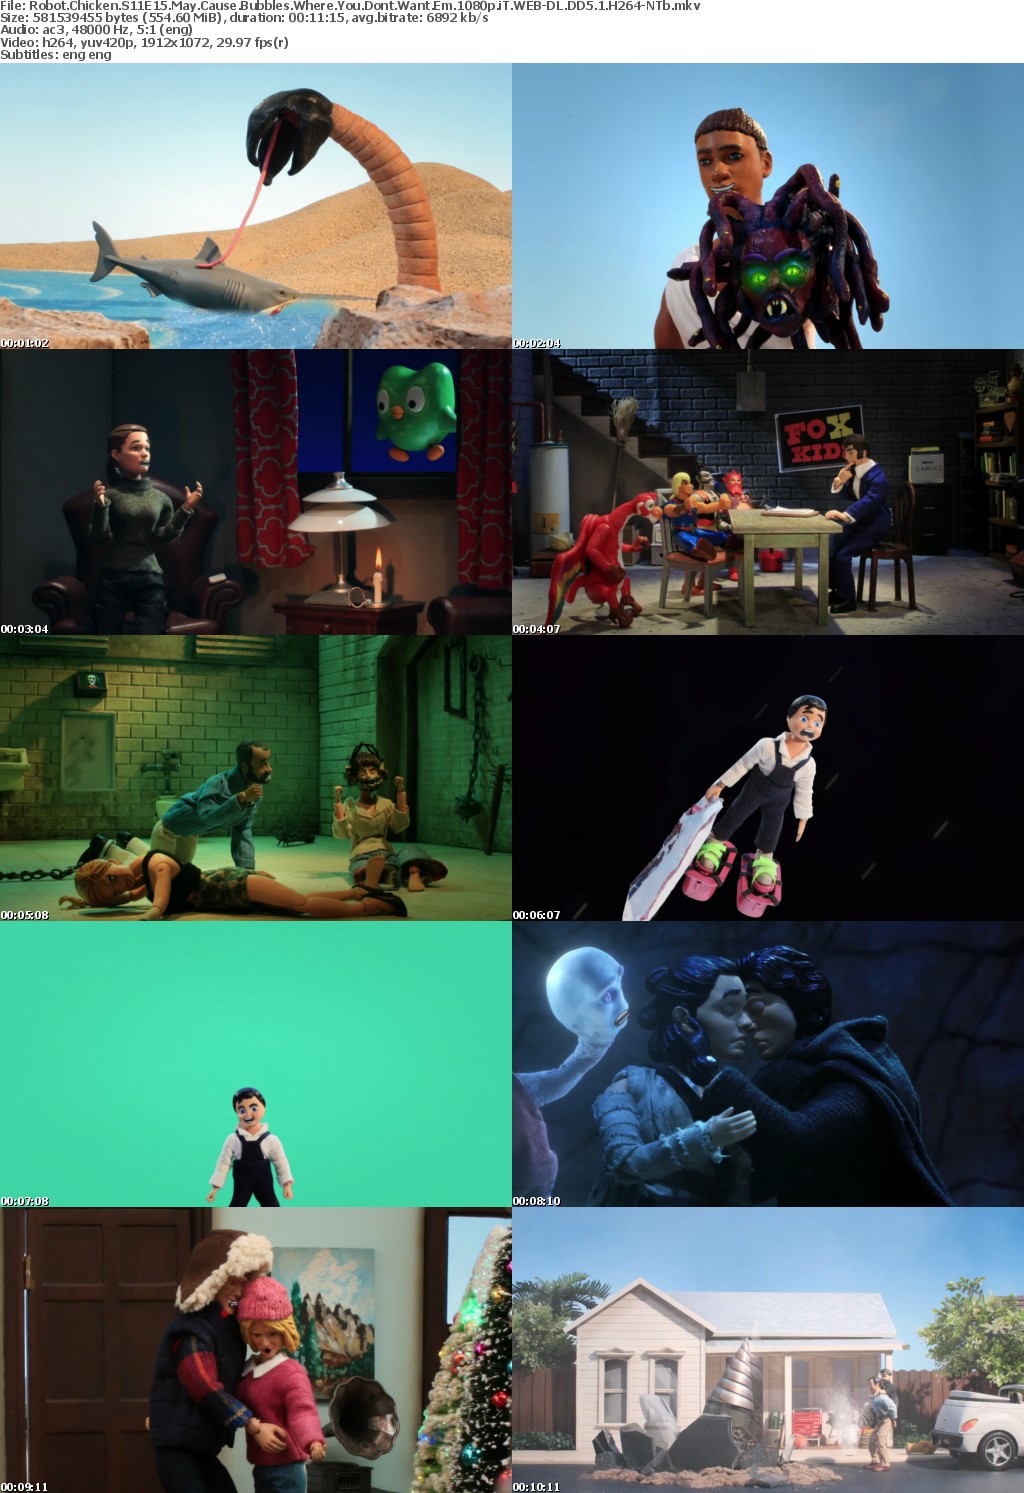 Robot Chicken S11E15 May Cause Bubbles Where You Dont Want Em 1080p WEB-DL DD5 1 H264-NTb